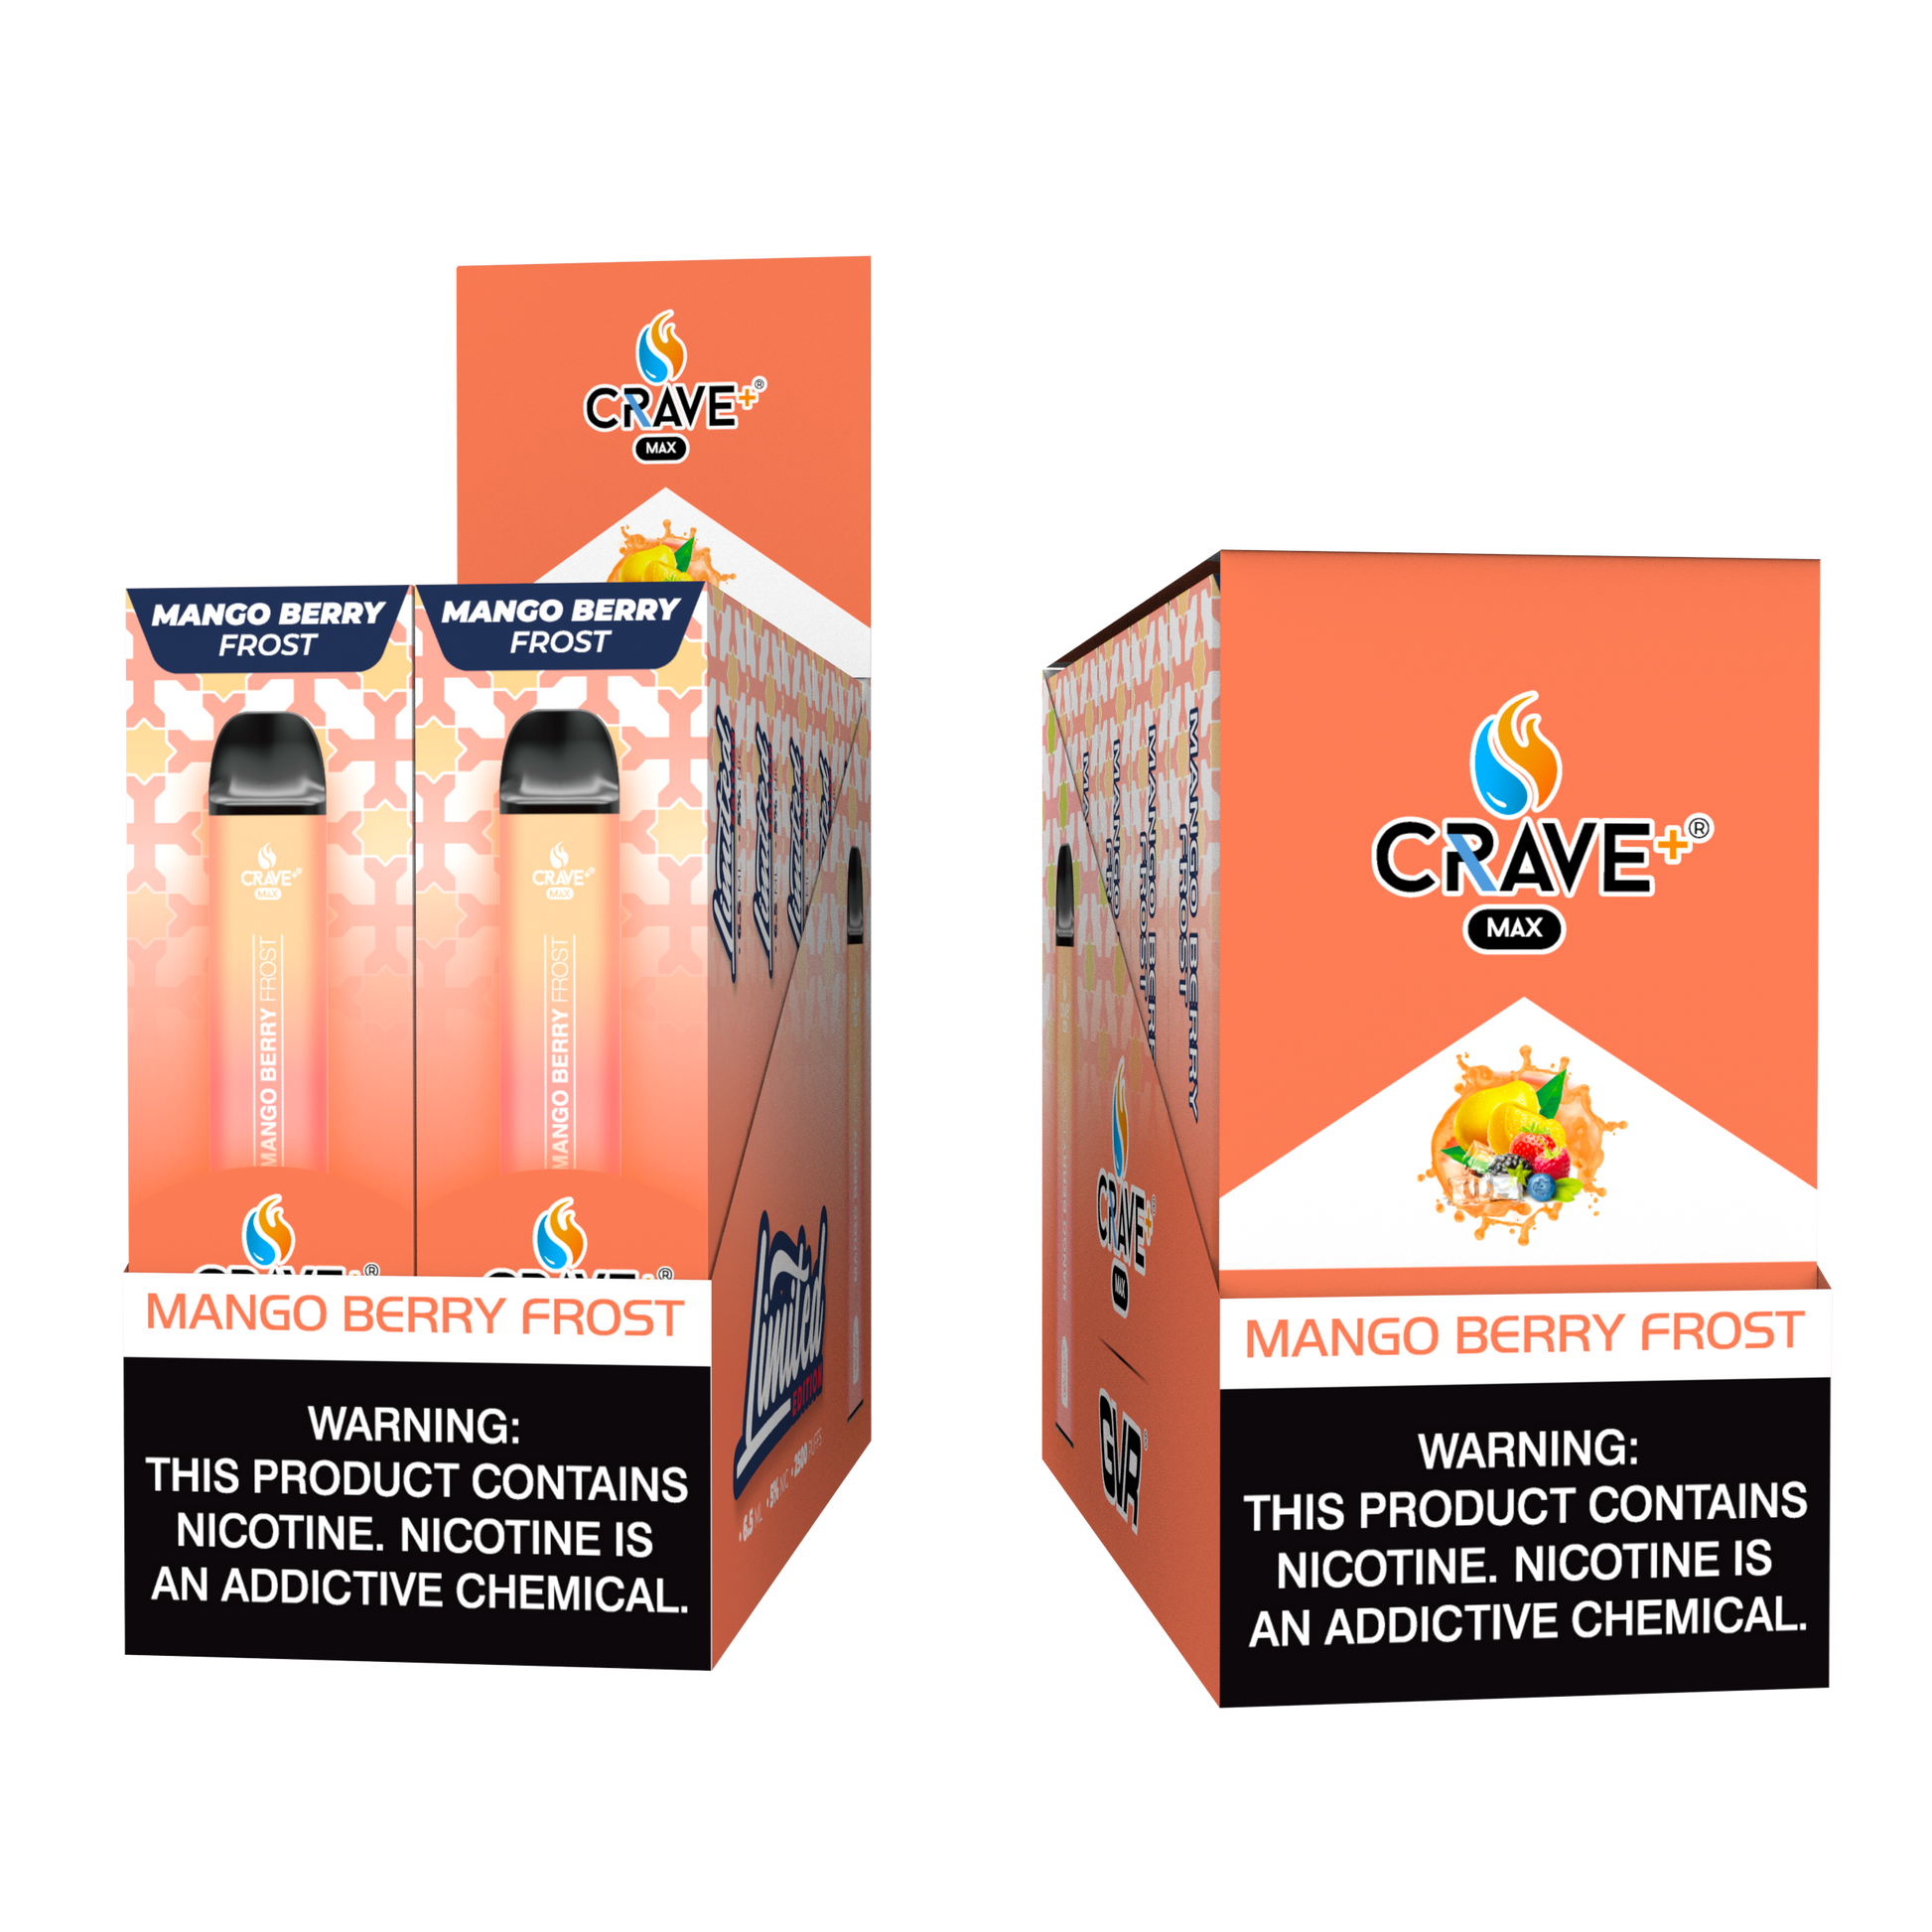 crave max, crave vape, buy crave max, crave max for sale, crave max flavors, crave flavors vape, buy crave vape online, crave max gvr, crave 2500 puffs, crave max mango, crave max mango berry, crave max mango berry frost, crave max mang berry forst, crave max mang, crave mang berry, crave max mango frost, crave max limited edition, crave max disposable 2500 puffs, crave max bulk, crave disposable bulk, crave max disposable